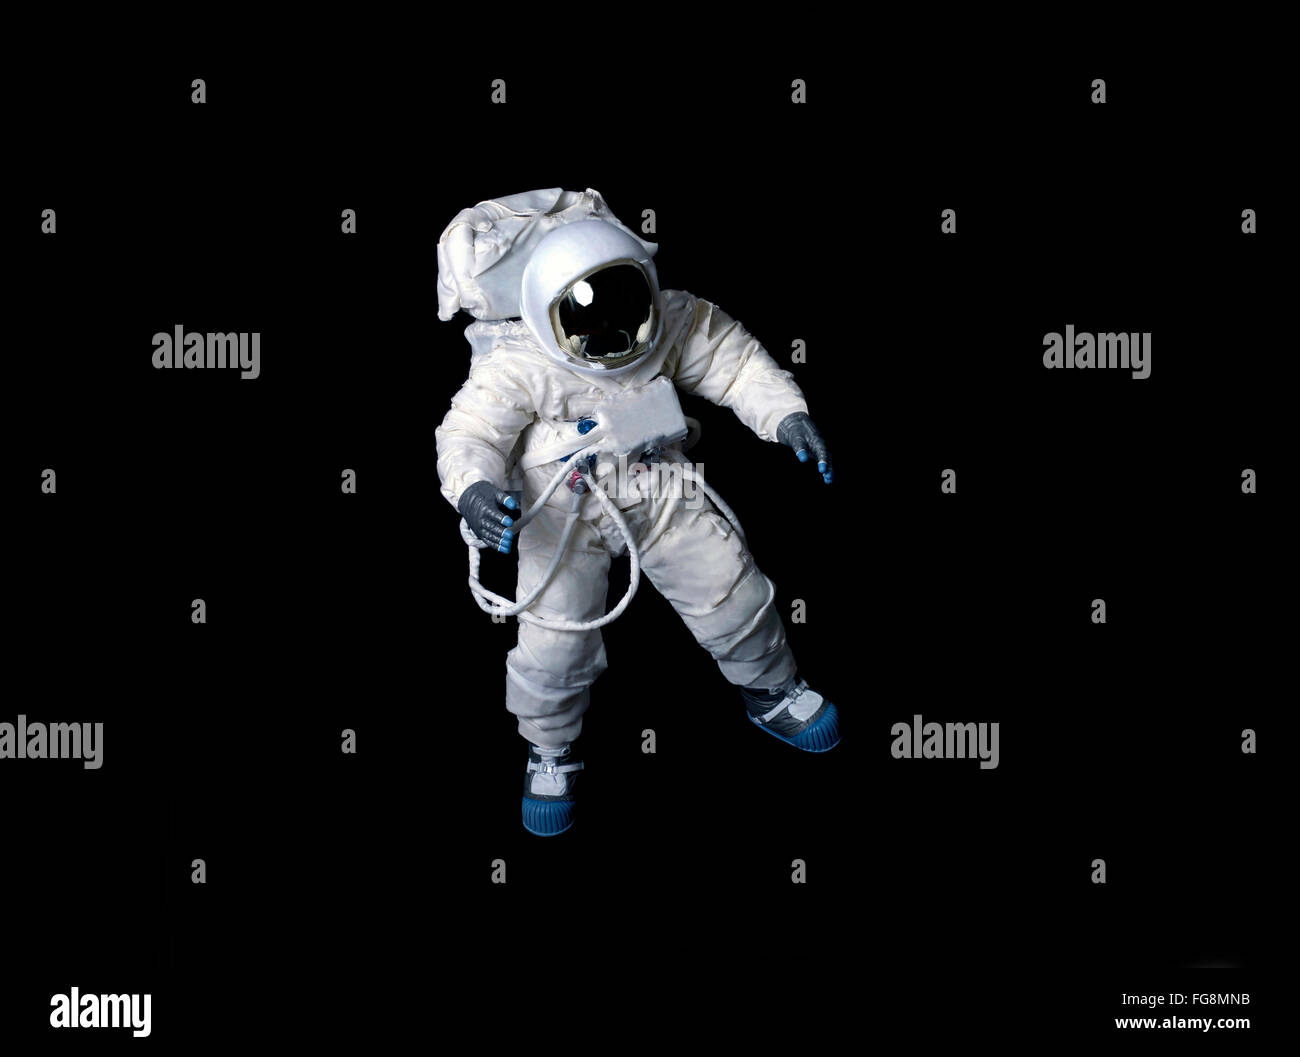 Astronaut wearing a pressure suit against a black background. Stock Photo